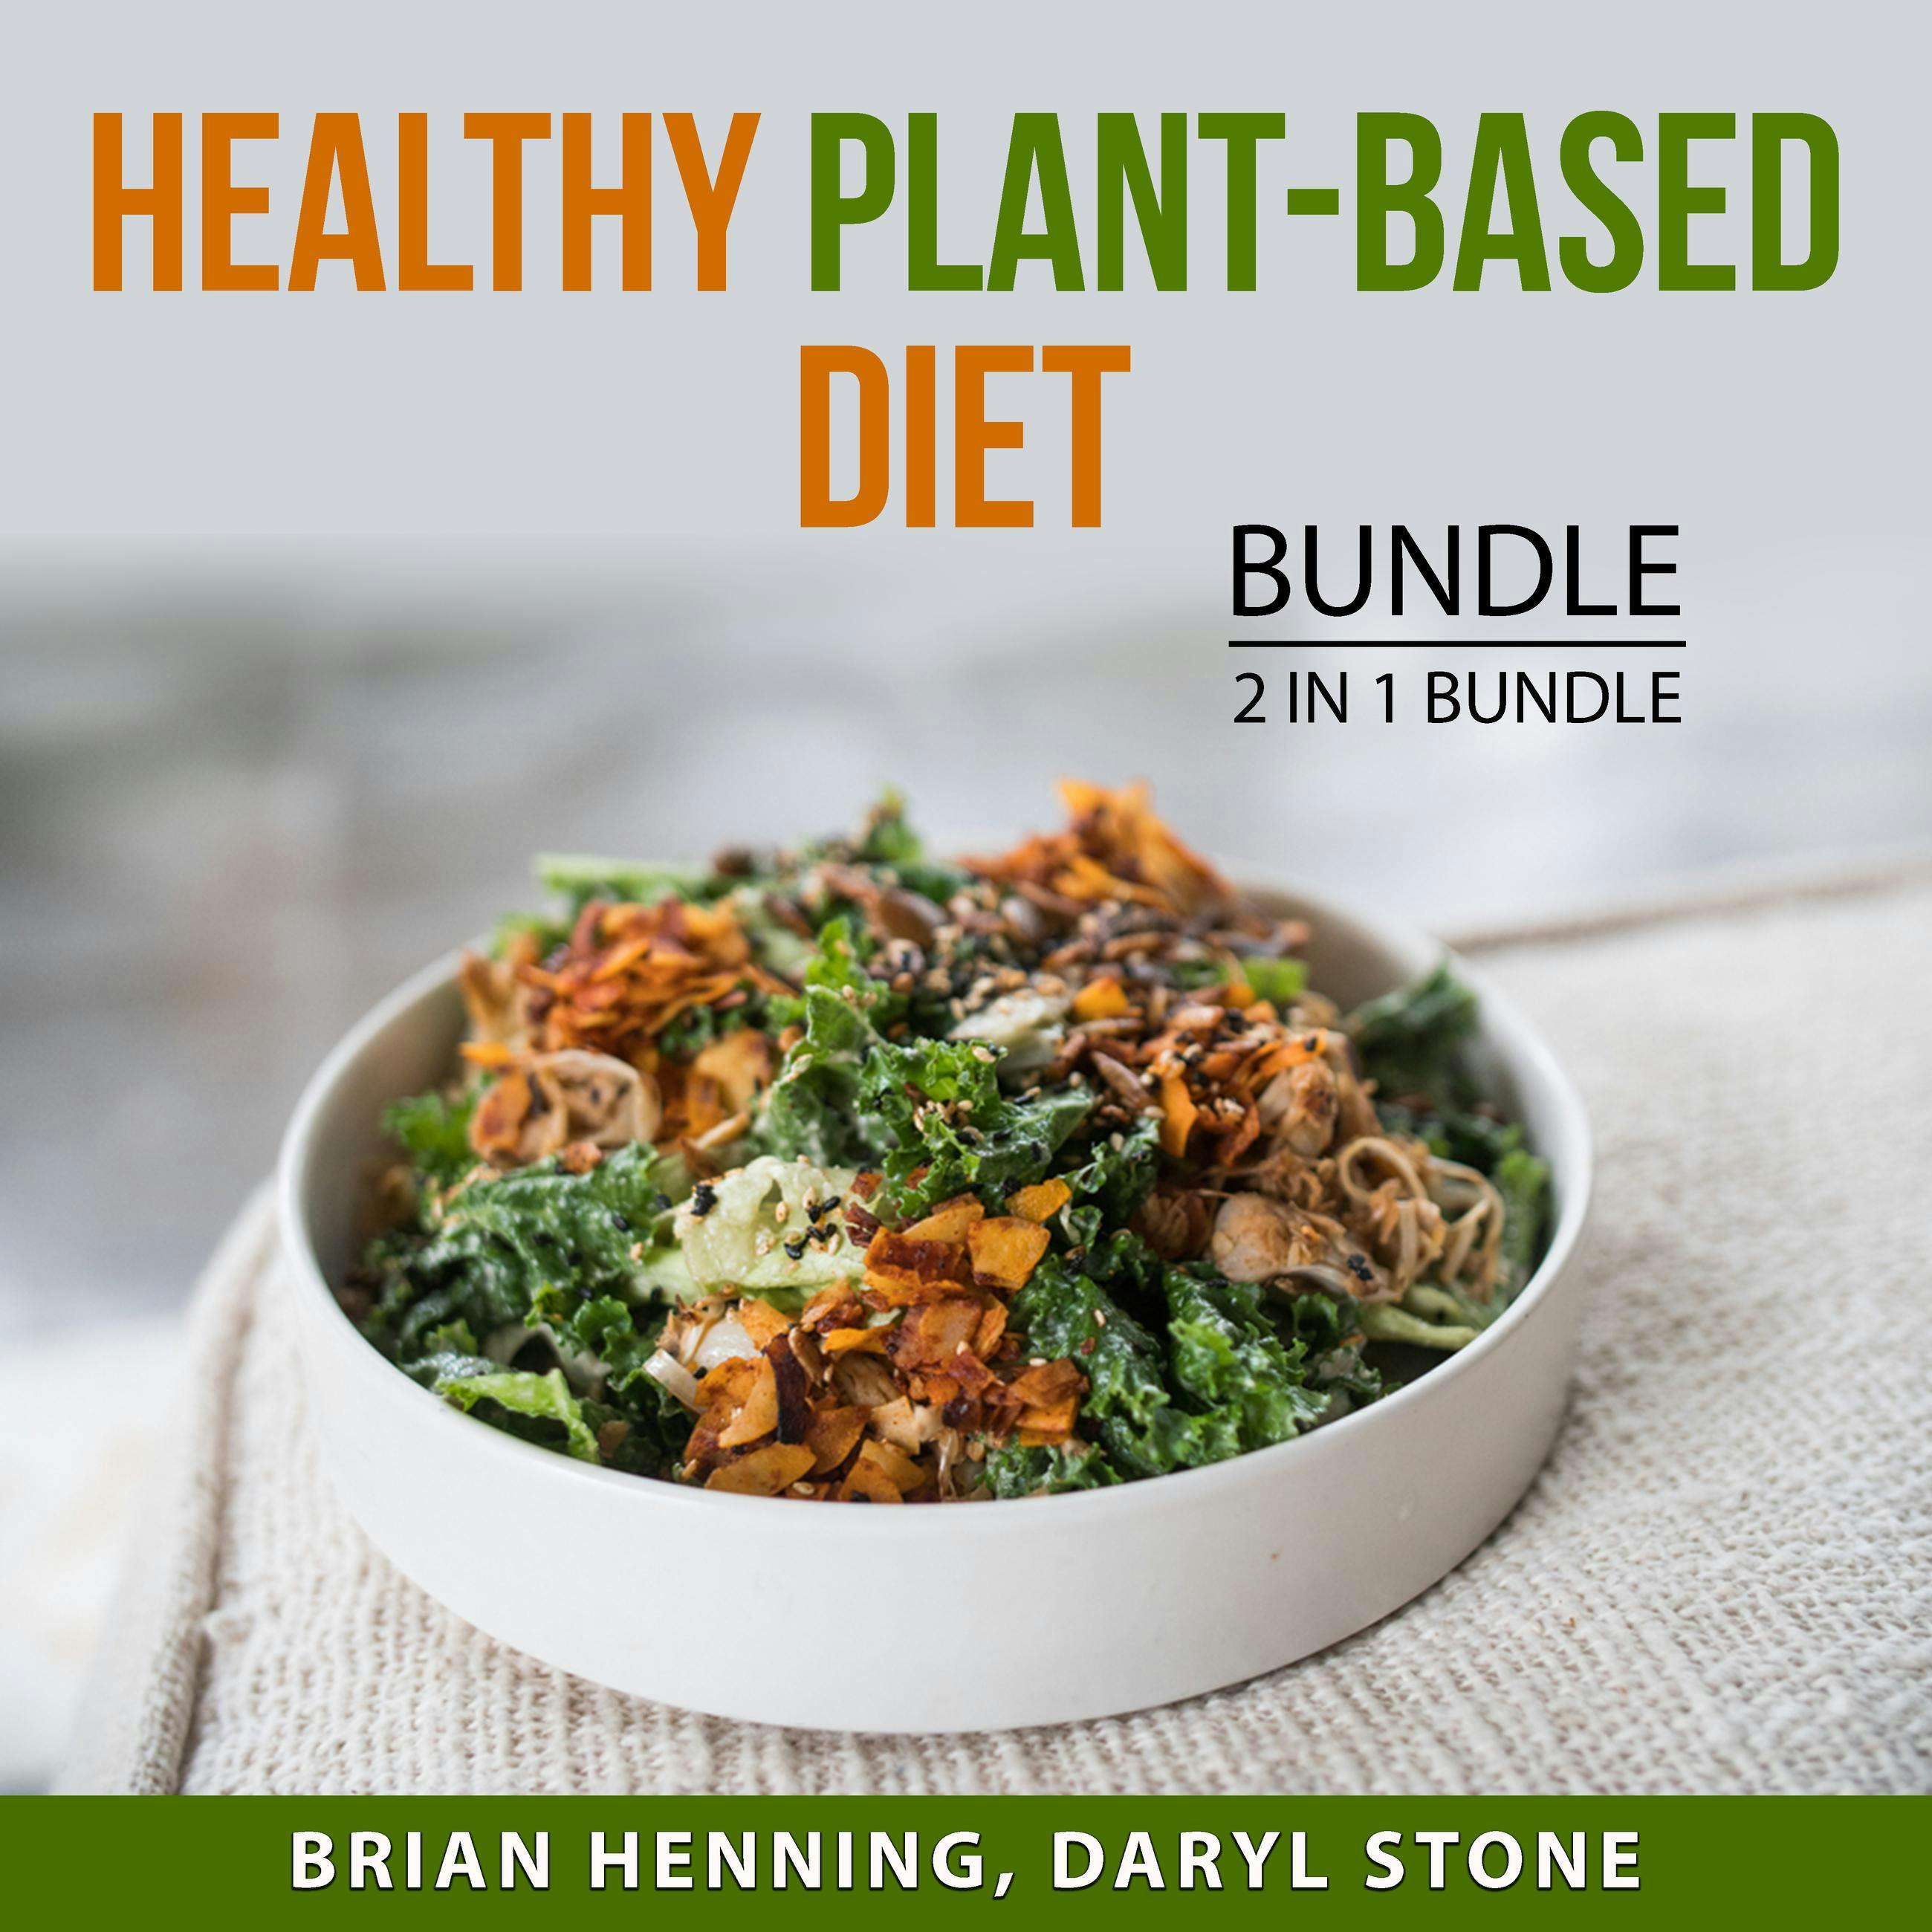 Healthy Plant-Based Diet Bundle, 2 in 1 Bundle: Vegan Diet and Lifestyle and Plant Based Diet for Beginners - Daryl Stone, Brian Henning